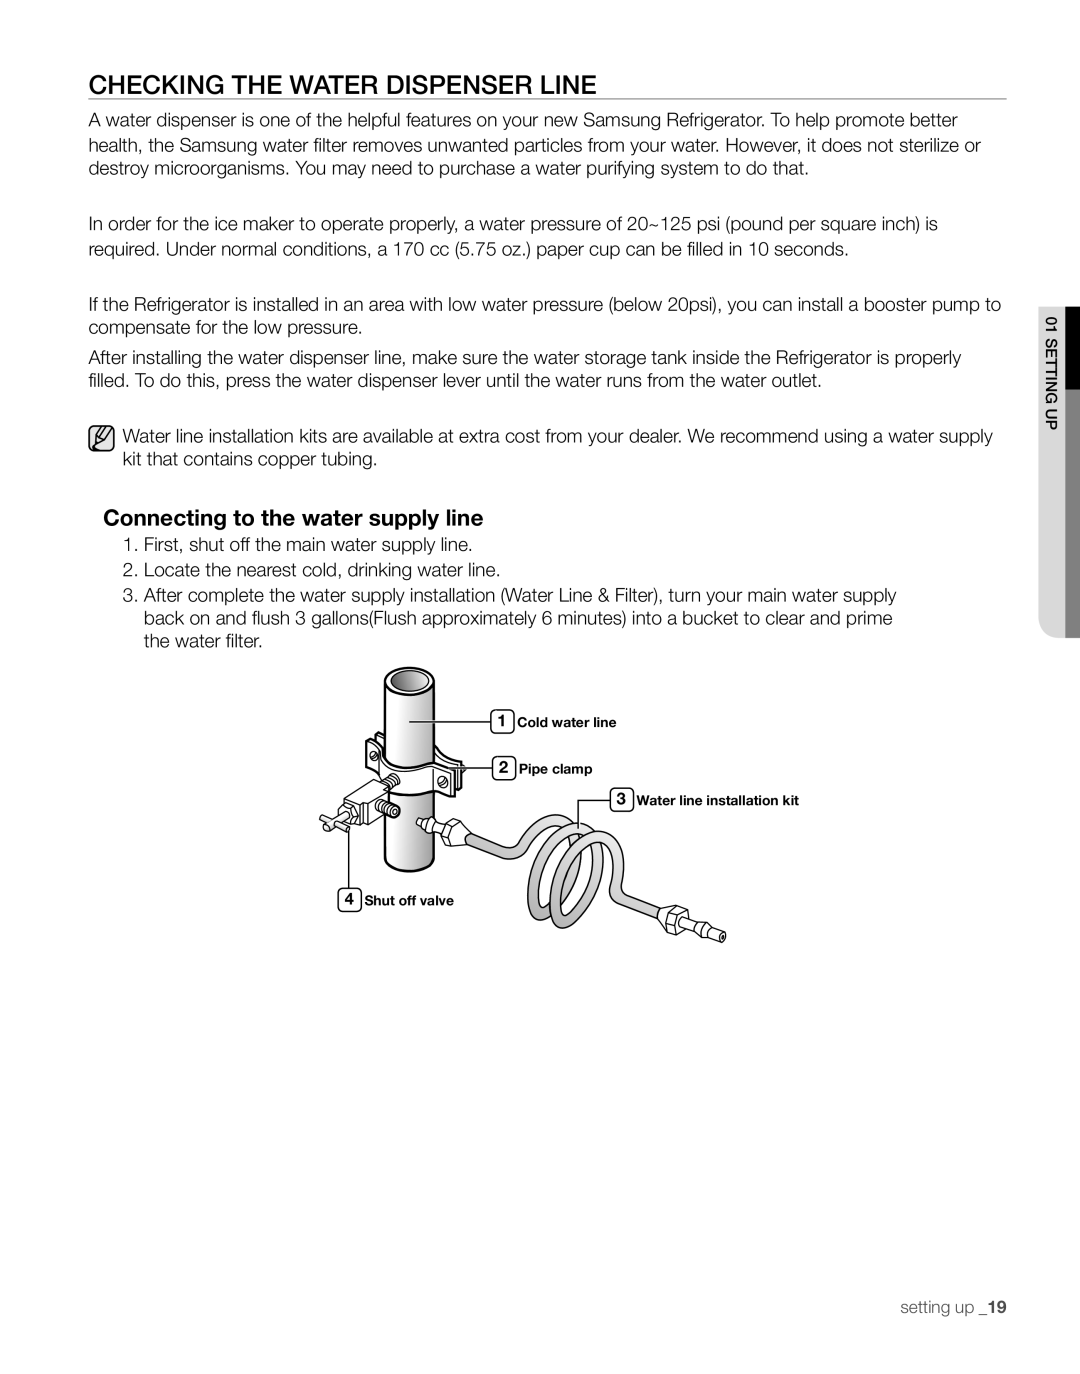 Samsung RS267TDPN user manual Checking The Water Dispenser Line, Connecting to the water supply line 